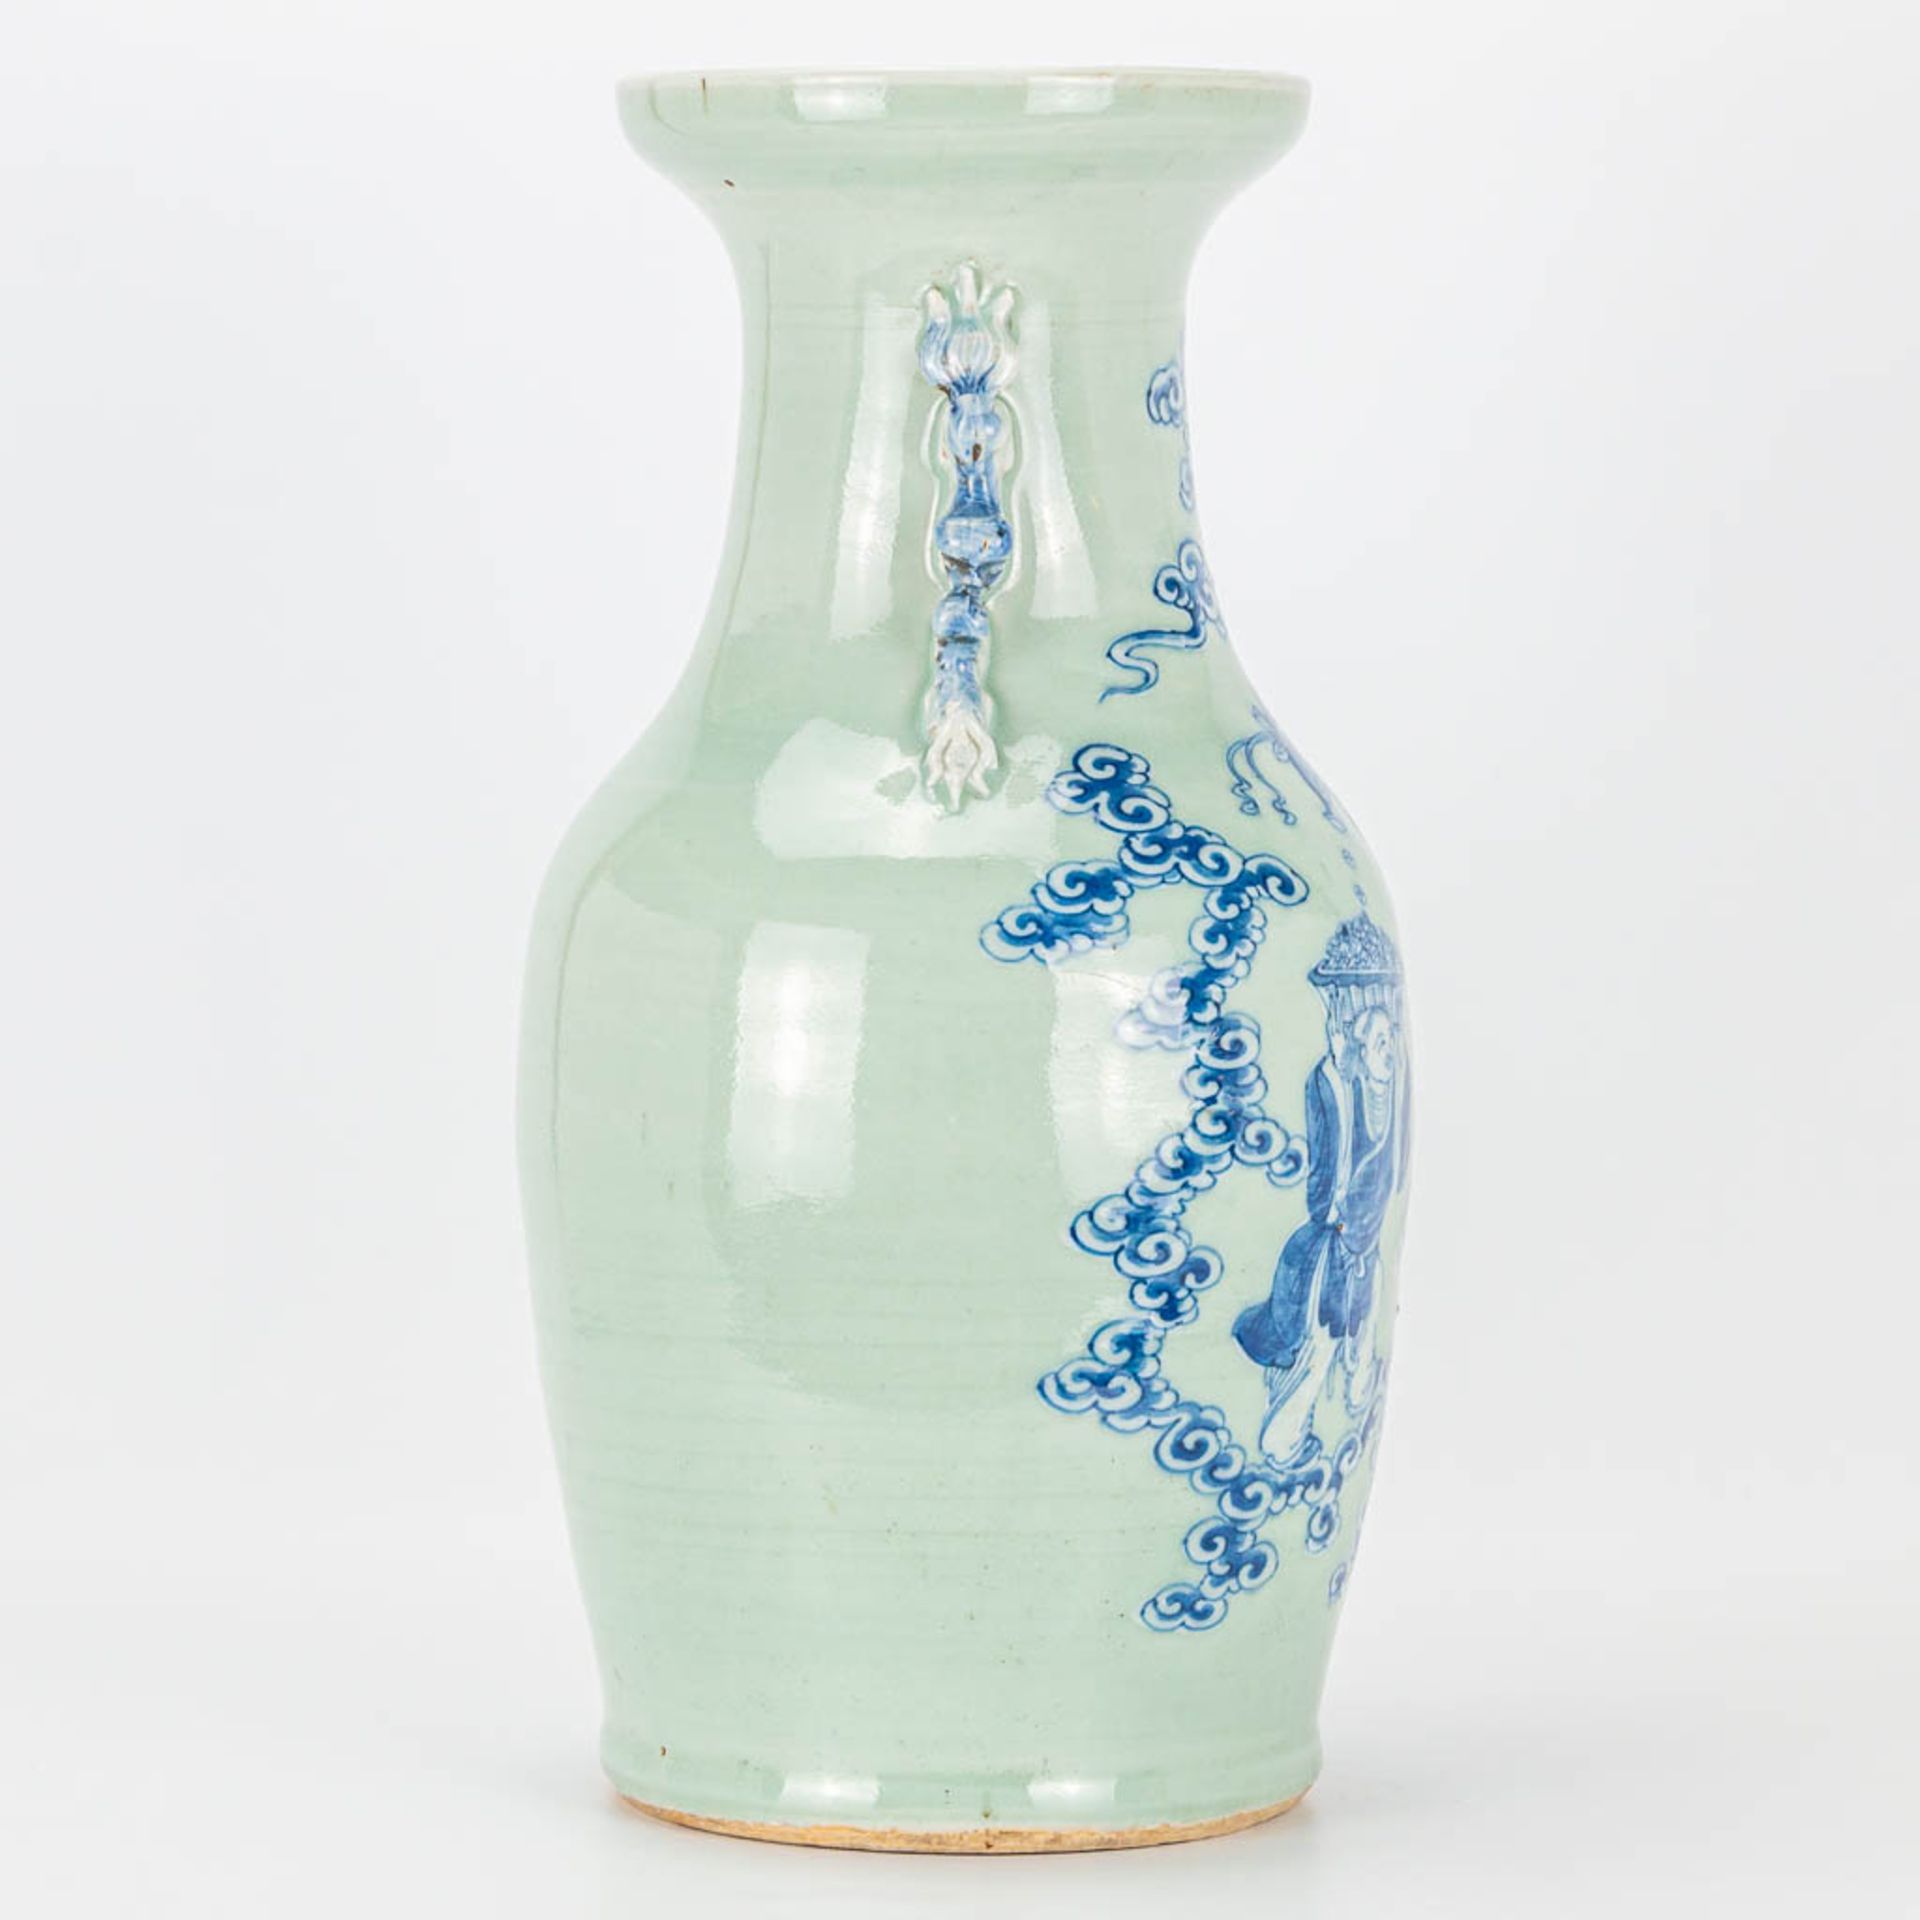 A vase made of Chinese porcelain with a blue-white decor. 19th/20th century. - Image 3 of 14